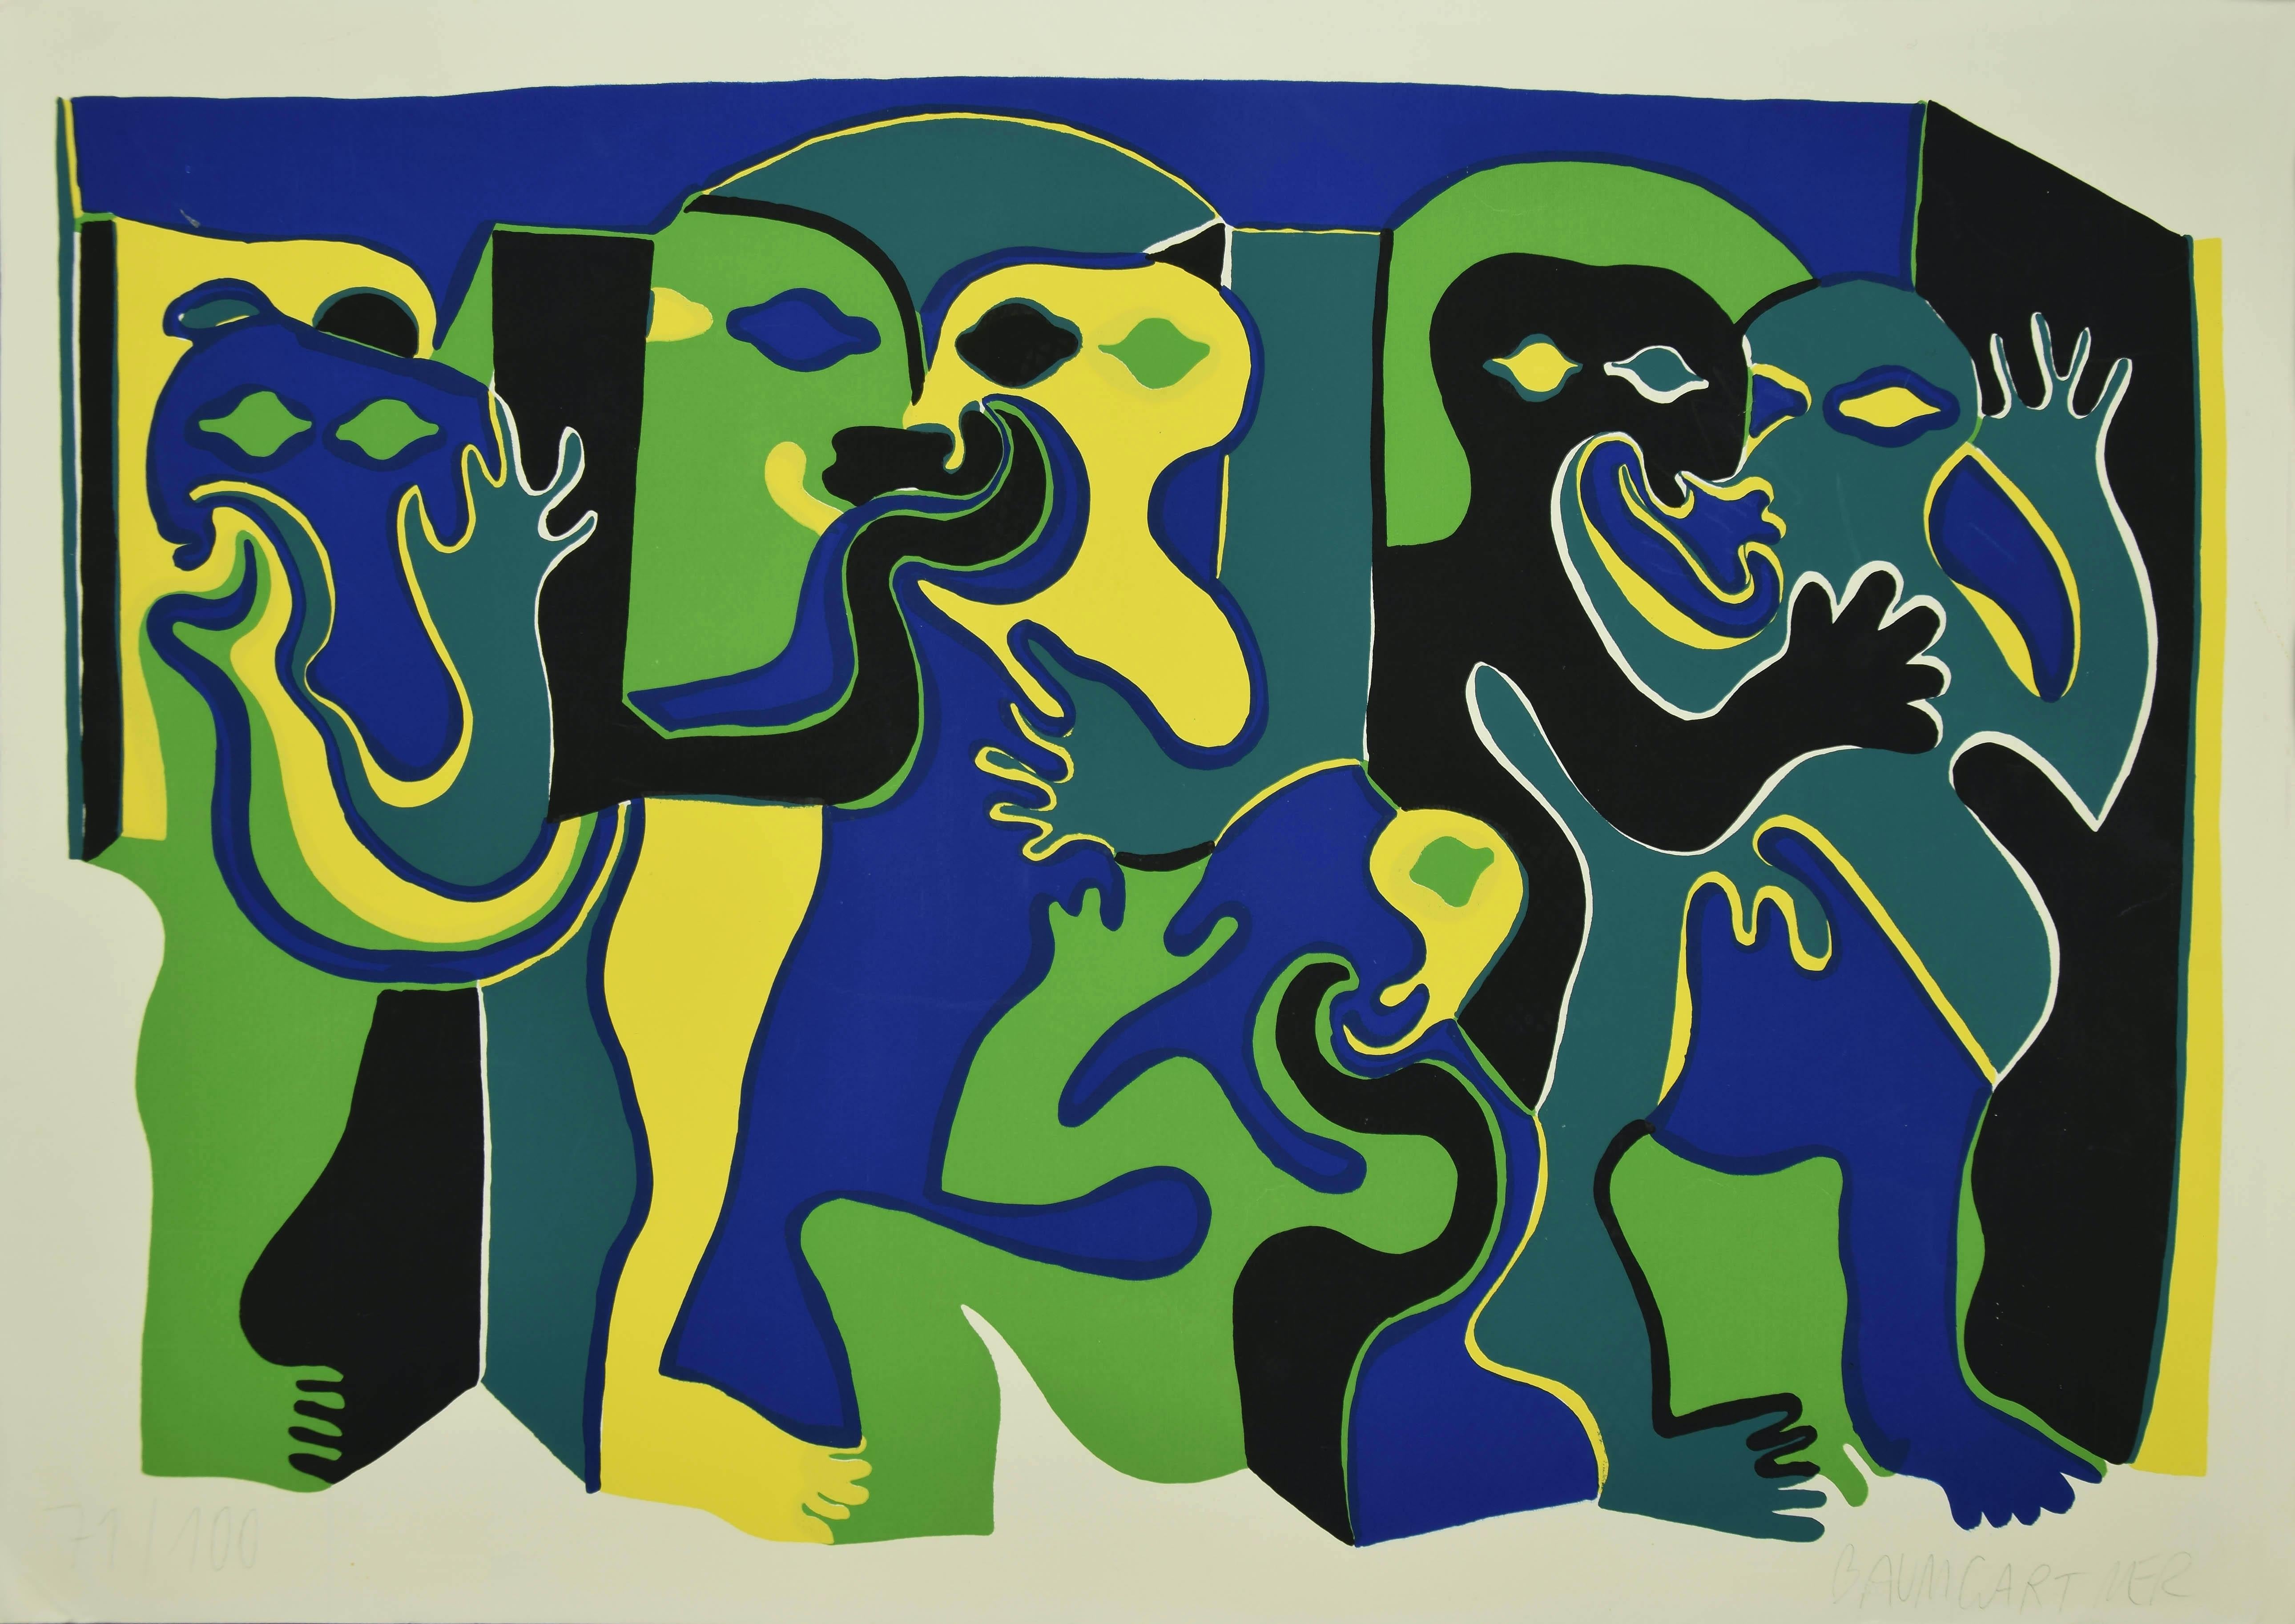 Green Figures is an original colored screen print, realized in 1970 ca. by the German artist Fritz Baumgartner.

Hand-Signed on lower right margin in pencil and numbered on the lower left, edition of 71/100 prints.

In very good conditions, except